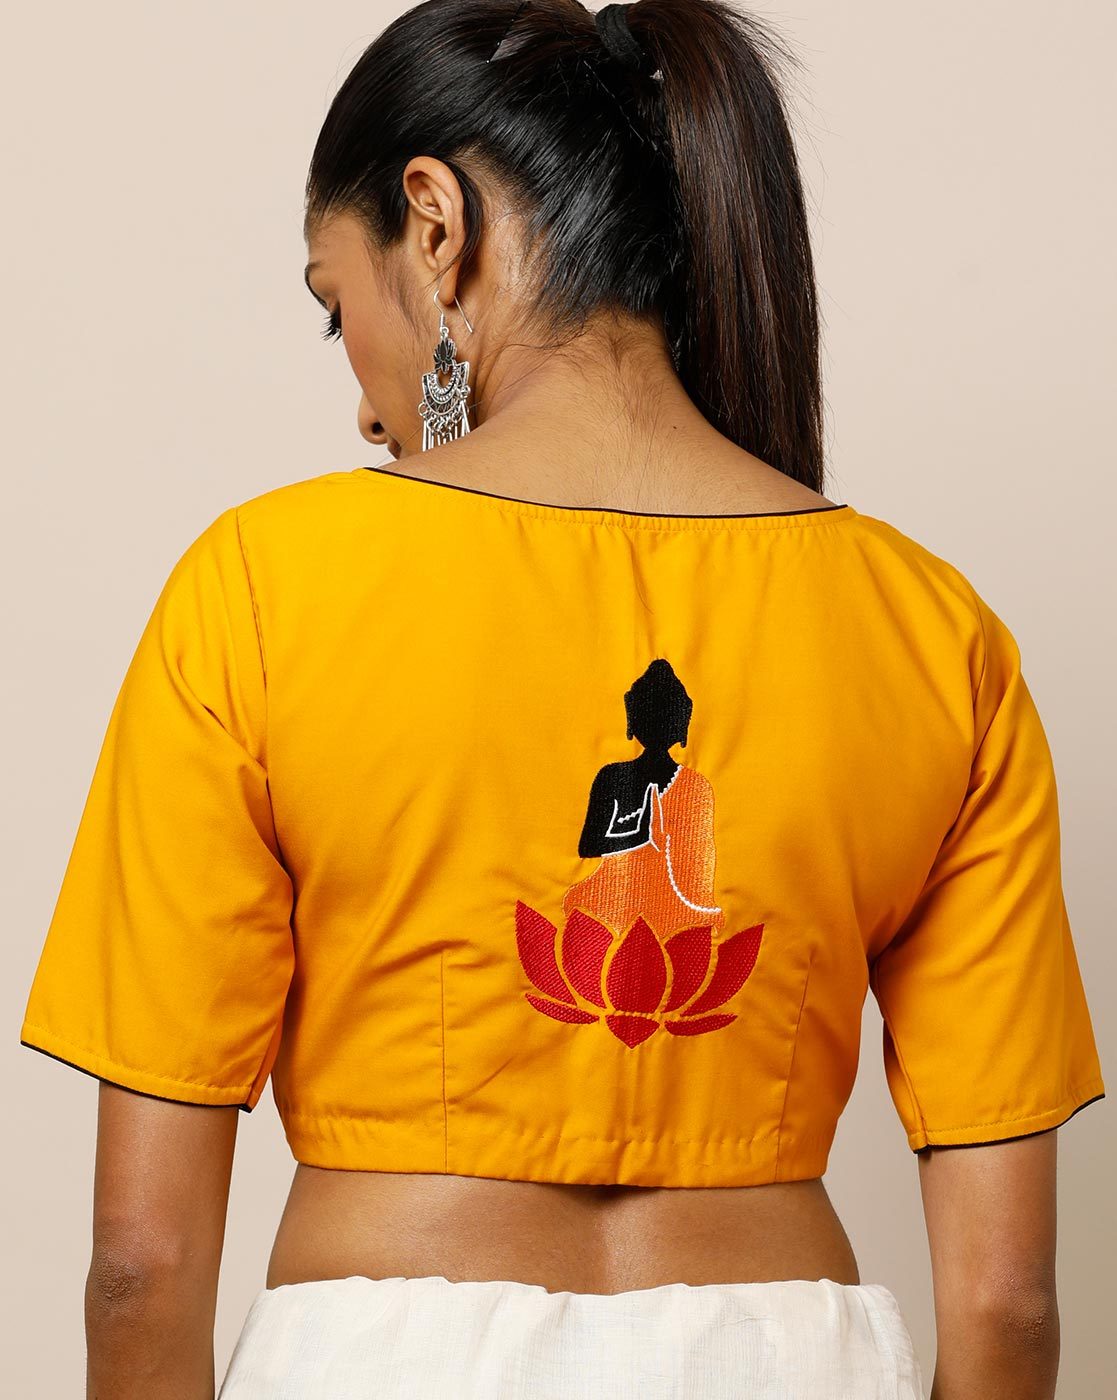 blouse-back-with-embroidery-designs-2019 (10)